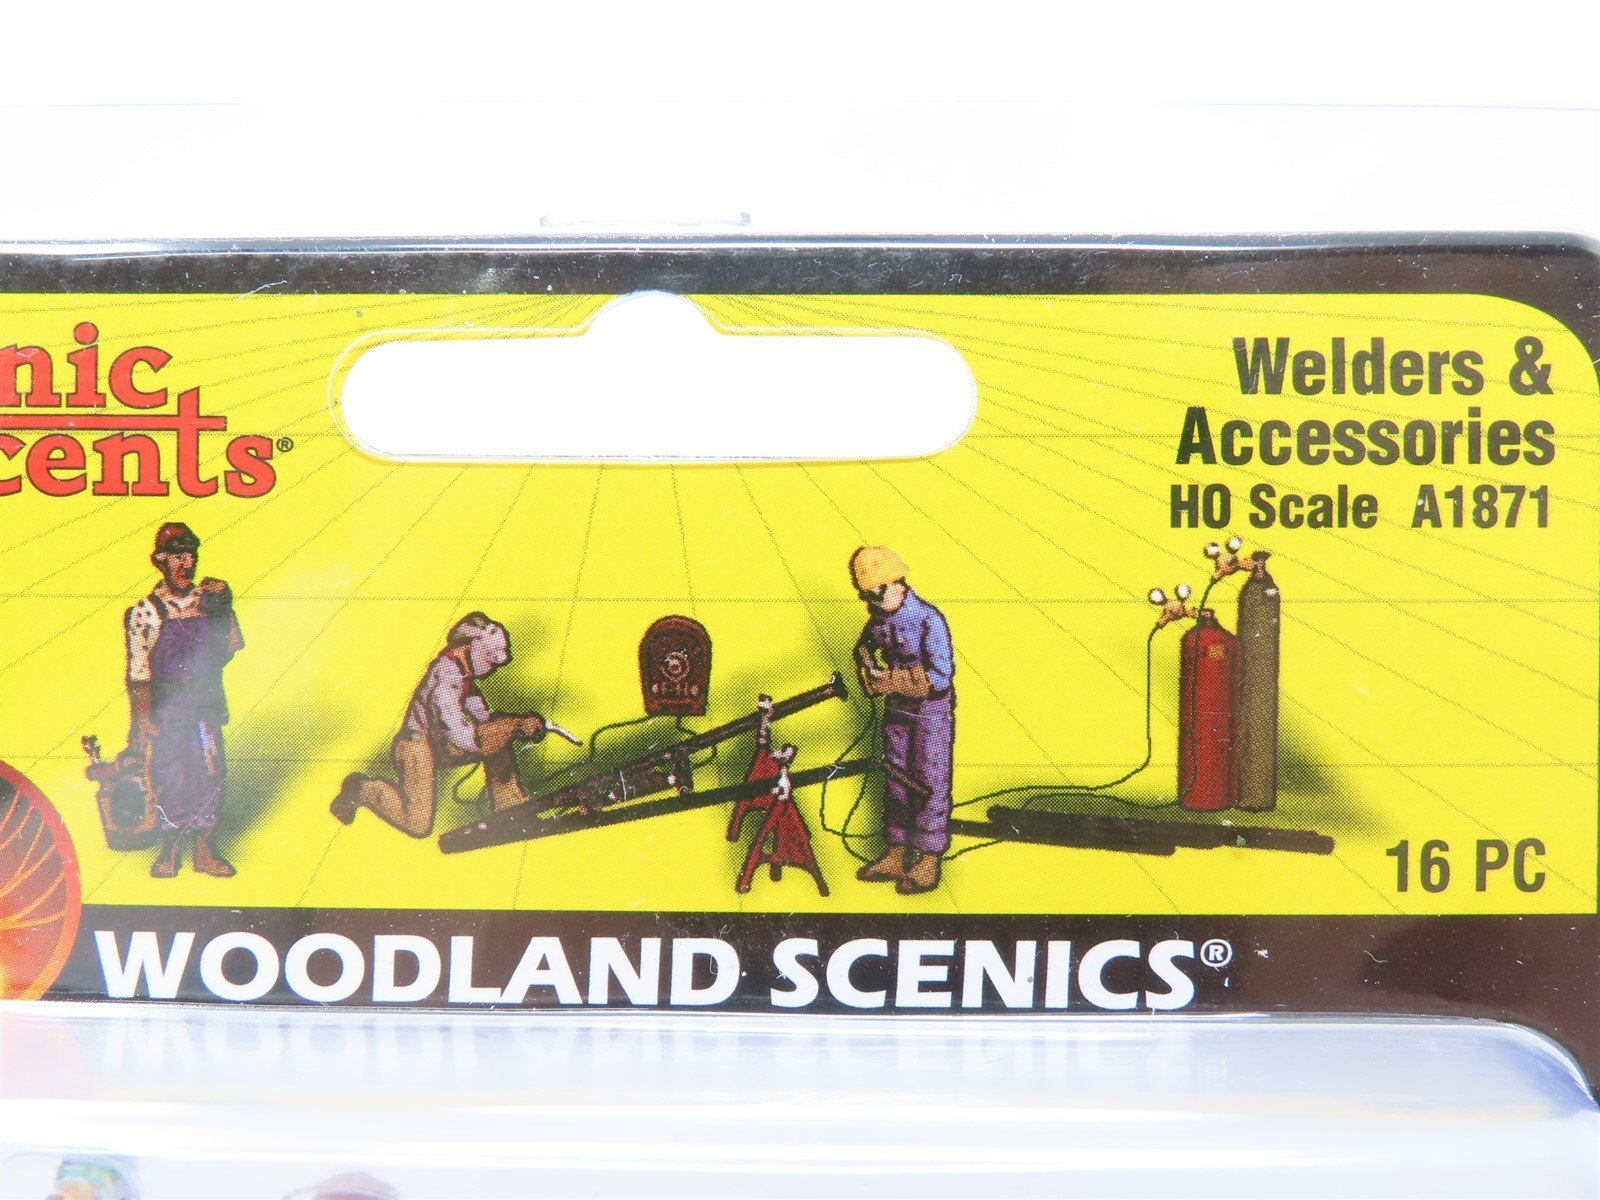 HO Scale Woodland Scenics A1871 Welders & Accessories Scenery